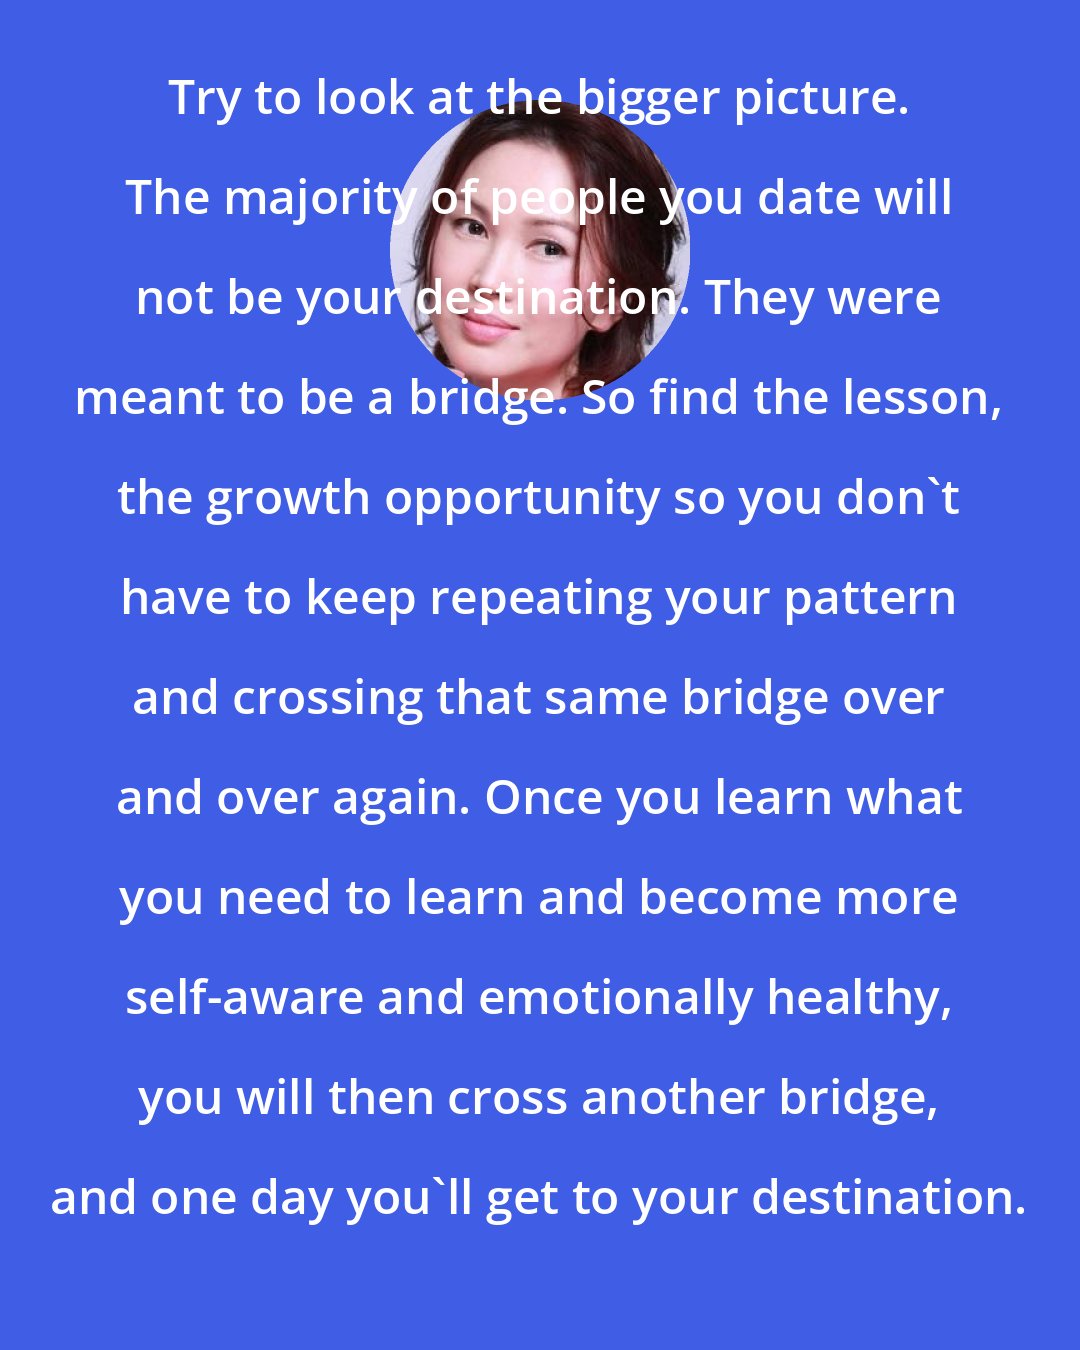 Amy Chan: Try to look at the bigger picture. The majority of people you date will not be your destination. They were meant to be a bridge. So find the lesson, the growth opportunity so you don't have to keep repeating your pattern and crossing that same bridge over and over again. Once you learn what you need to learn and become more self-aware and emotionally healthy, you will then cross another bridge, and one day you'll get to your destination.